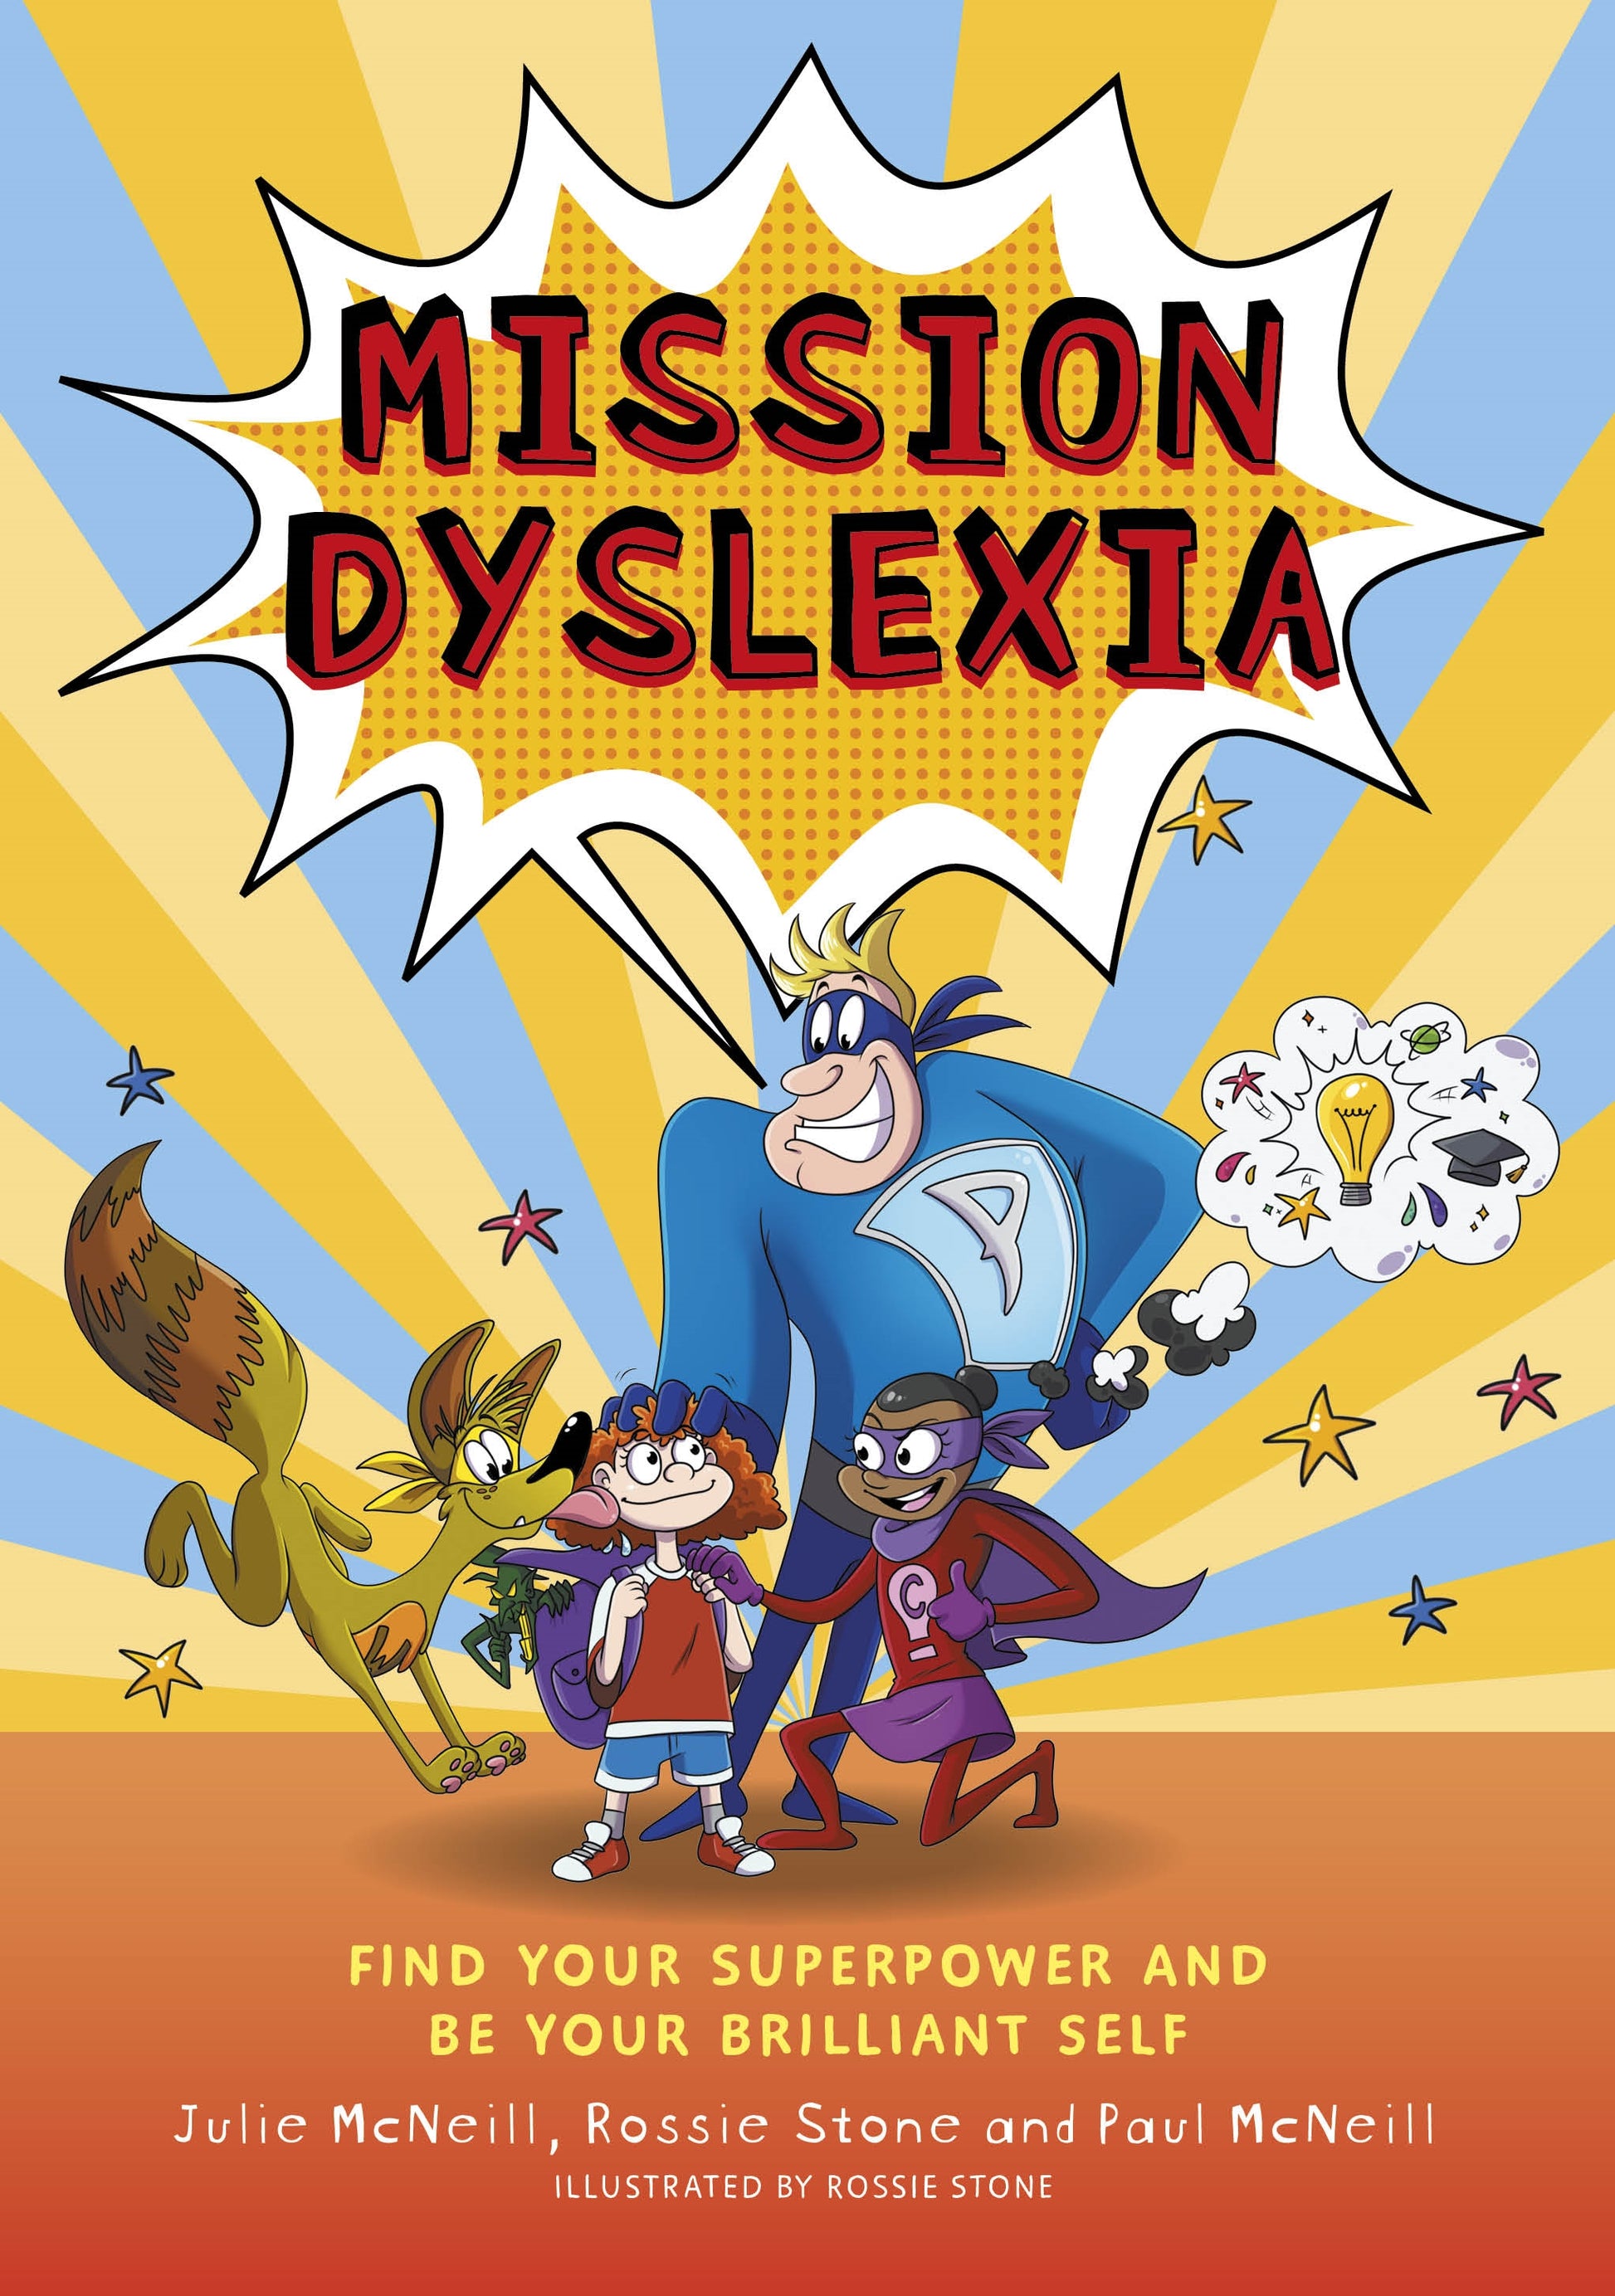 Mission Dyslexia by Julie McNeill, Paul McNeill, Rossie Stone, Rossie Stone